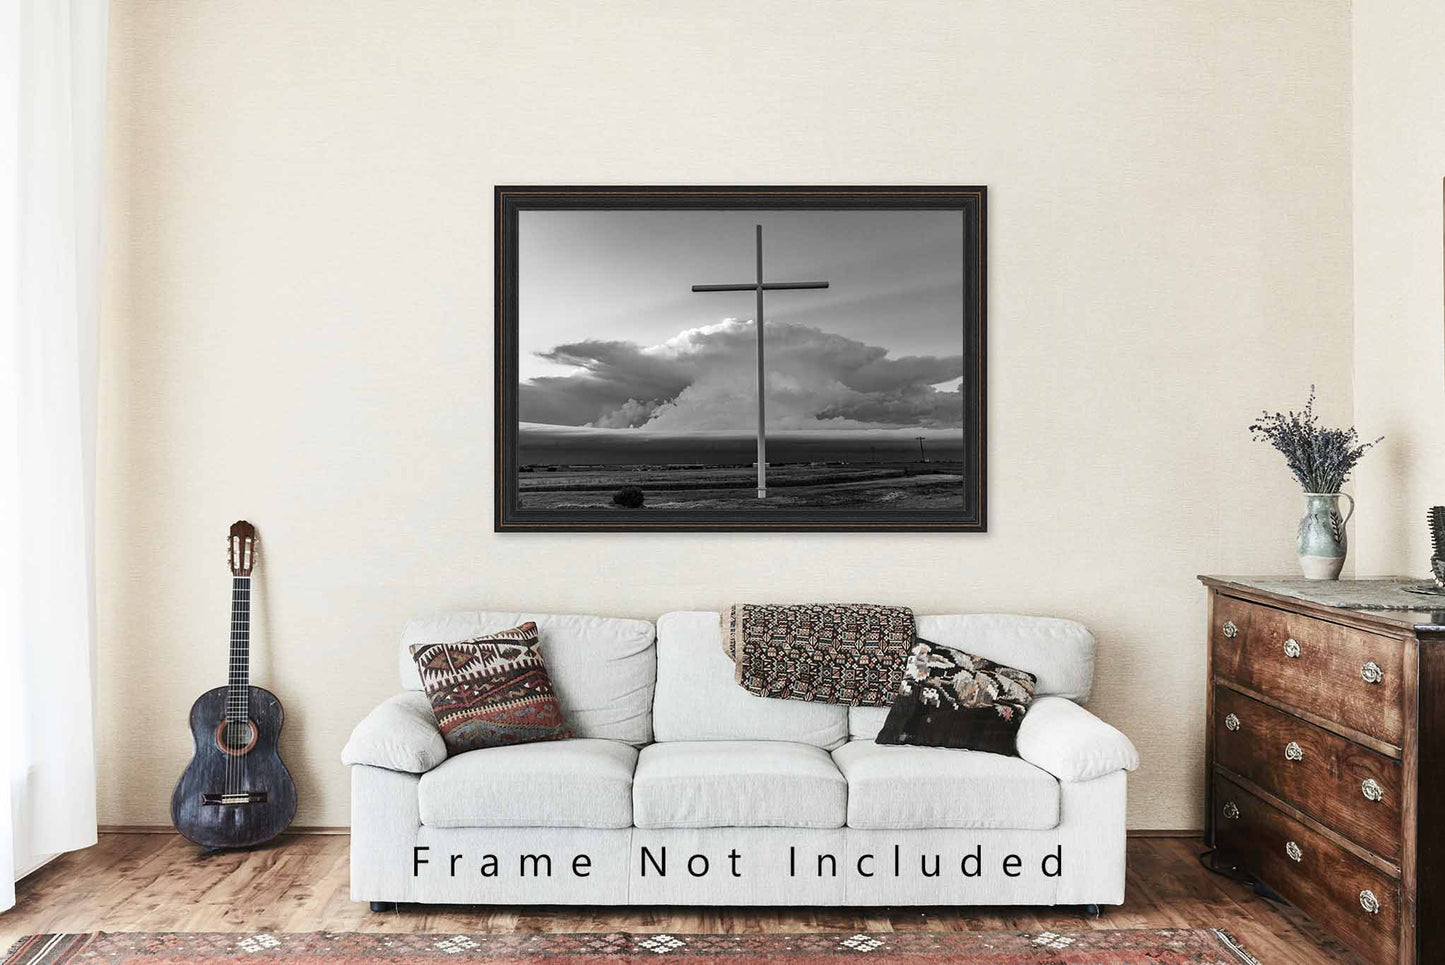 Spiritual Photography Print (Not Framed) Black and White Picture of a Large Cross and Supercell Thunderstorm in Oklahoma Christian Storm Wall Art Christian Decor